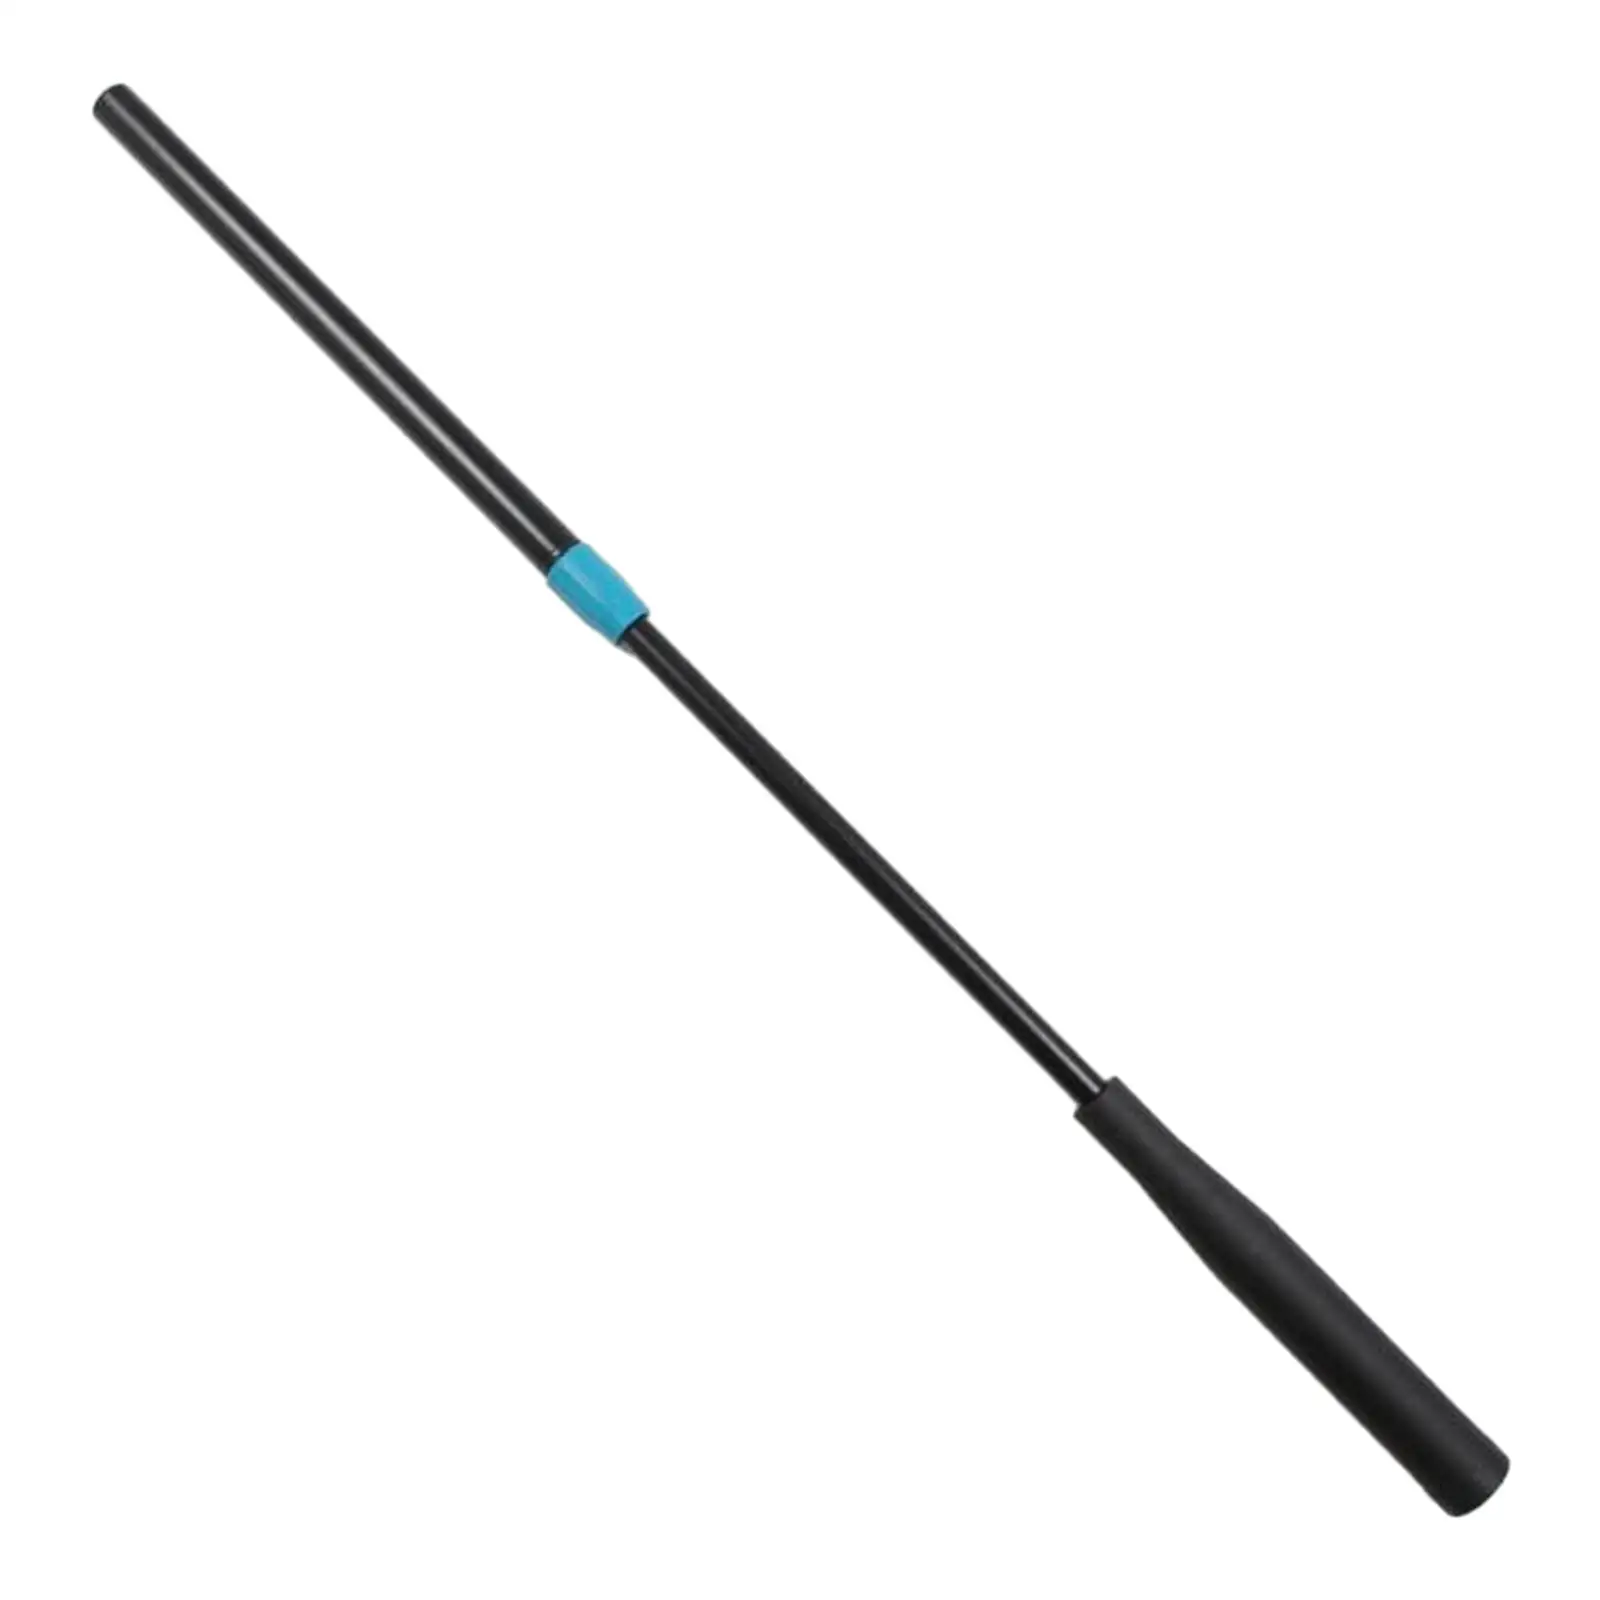 Pool Cue Extension, Billiard Pool Extension, Billiards Cue Shaft Sleeve Extension Tool, Lightweight Professional Accessories